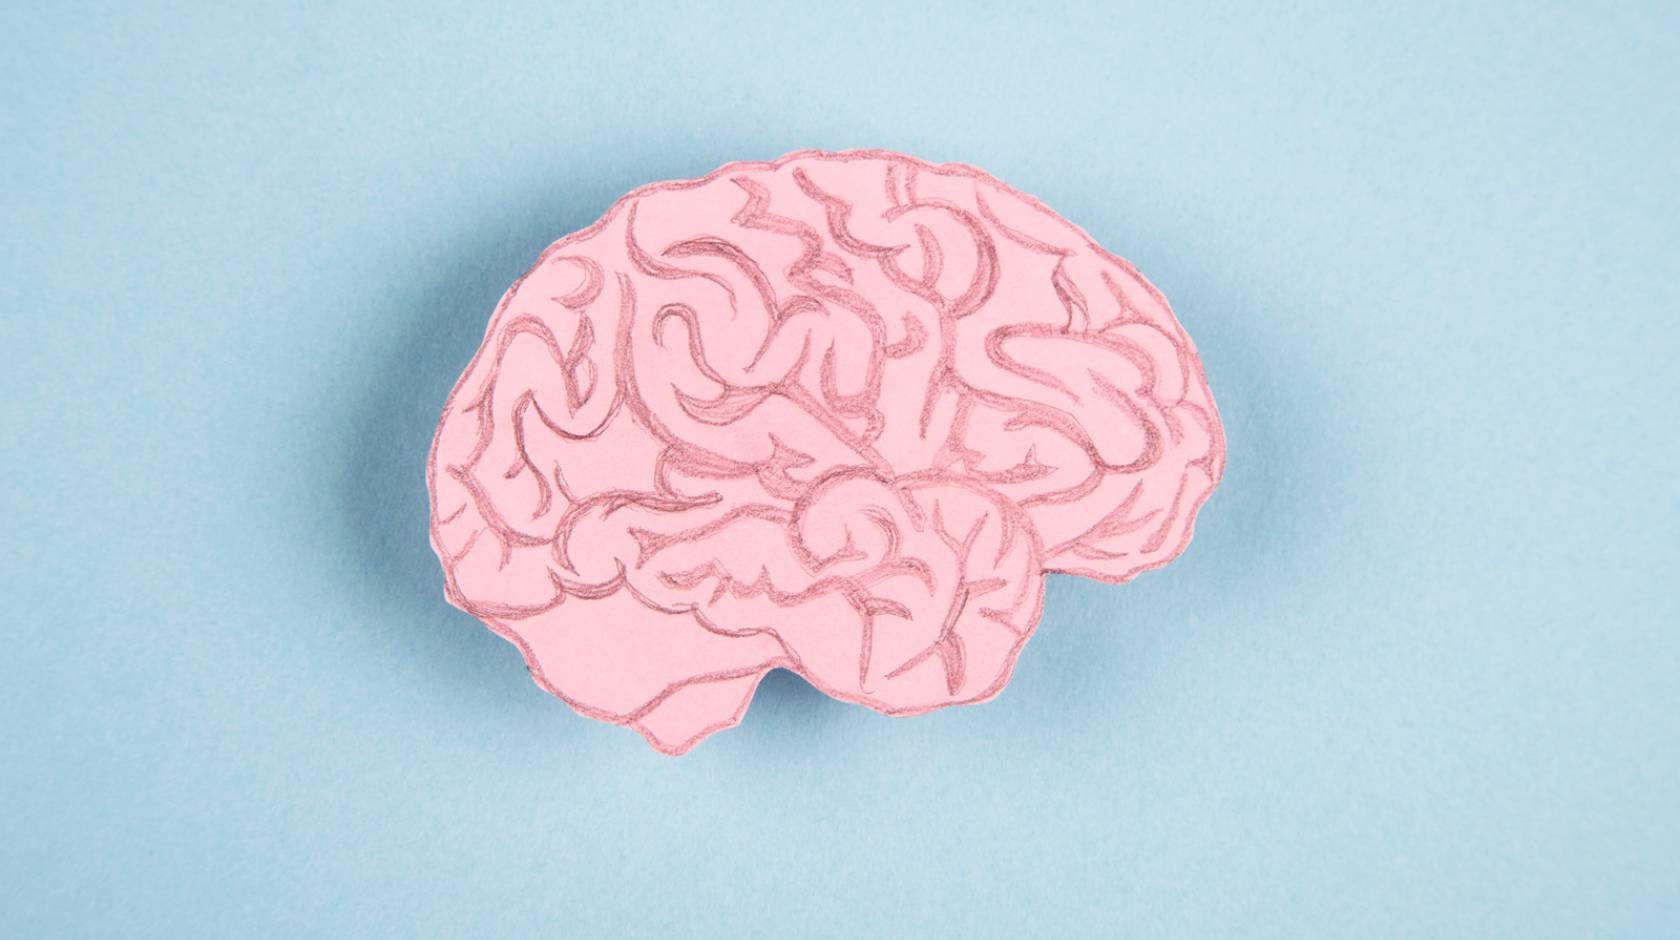 Human brain made of paper on a blue background